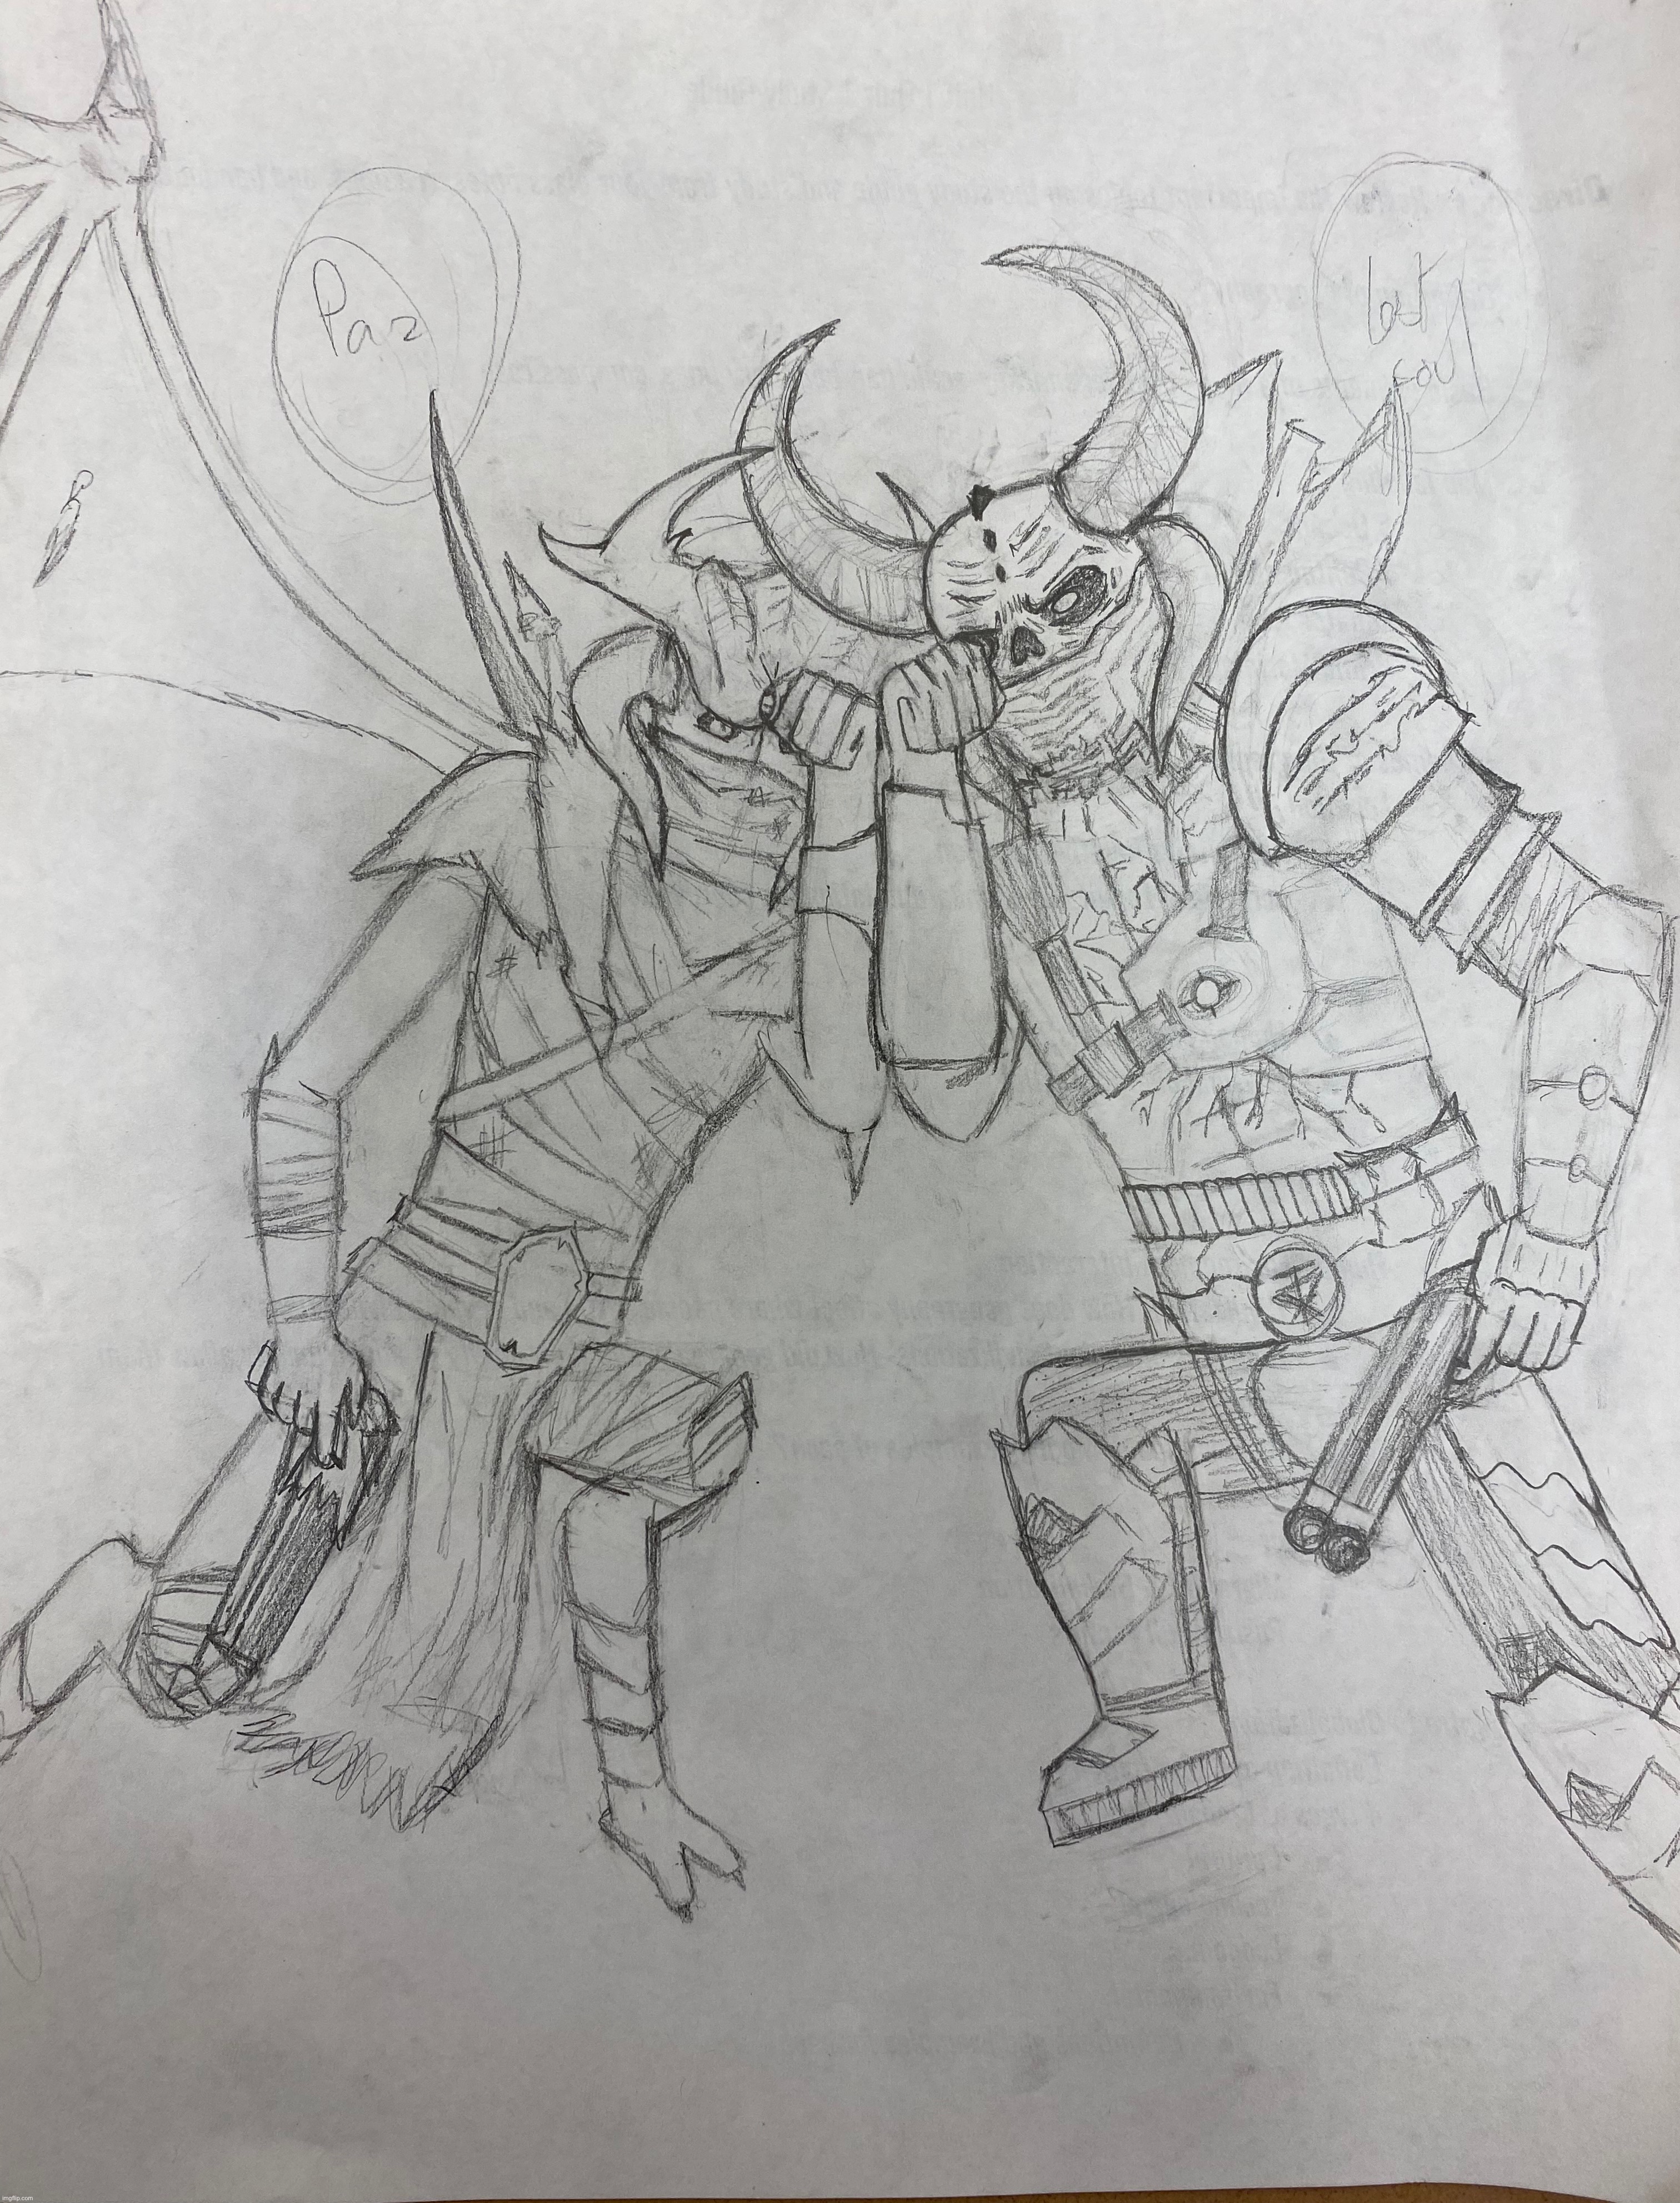 Another update on my metal hellsinger and doom crossover drawing | image tagged in doom eternal,metal hellsinger,drawing,why are you reading the tags | made w/ Imgflip meme maker